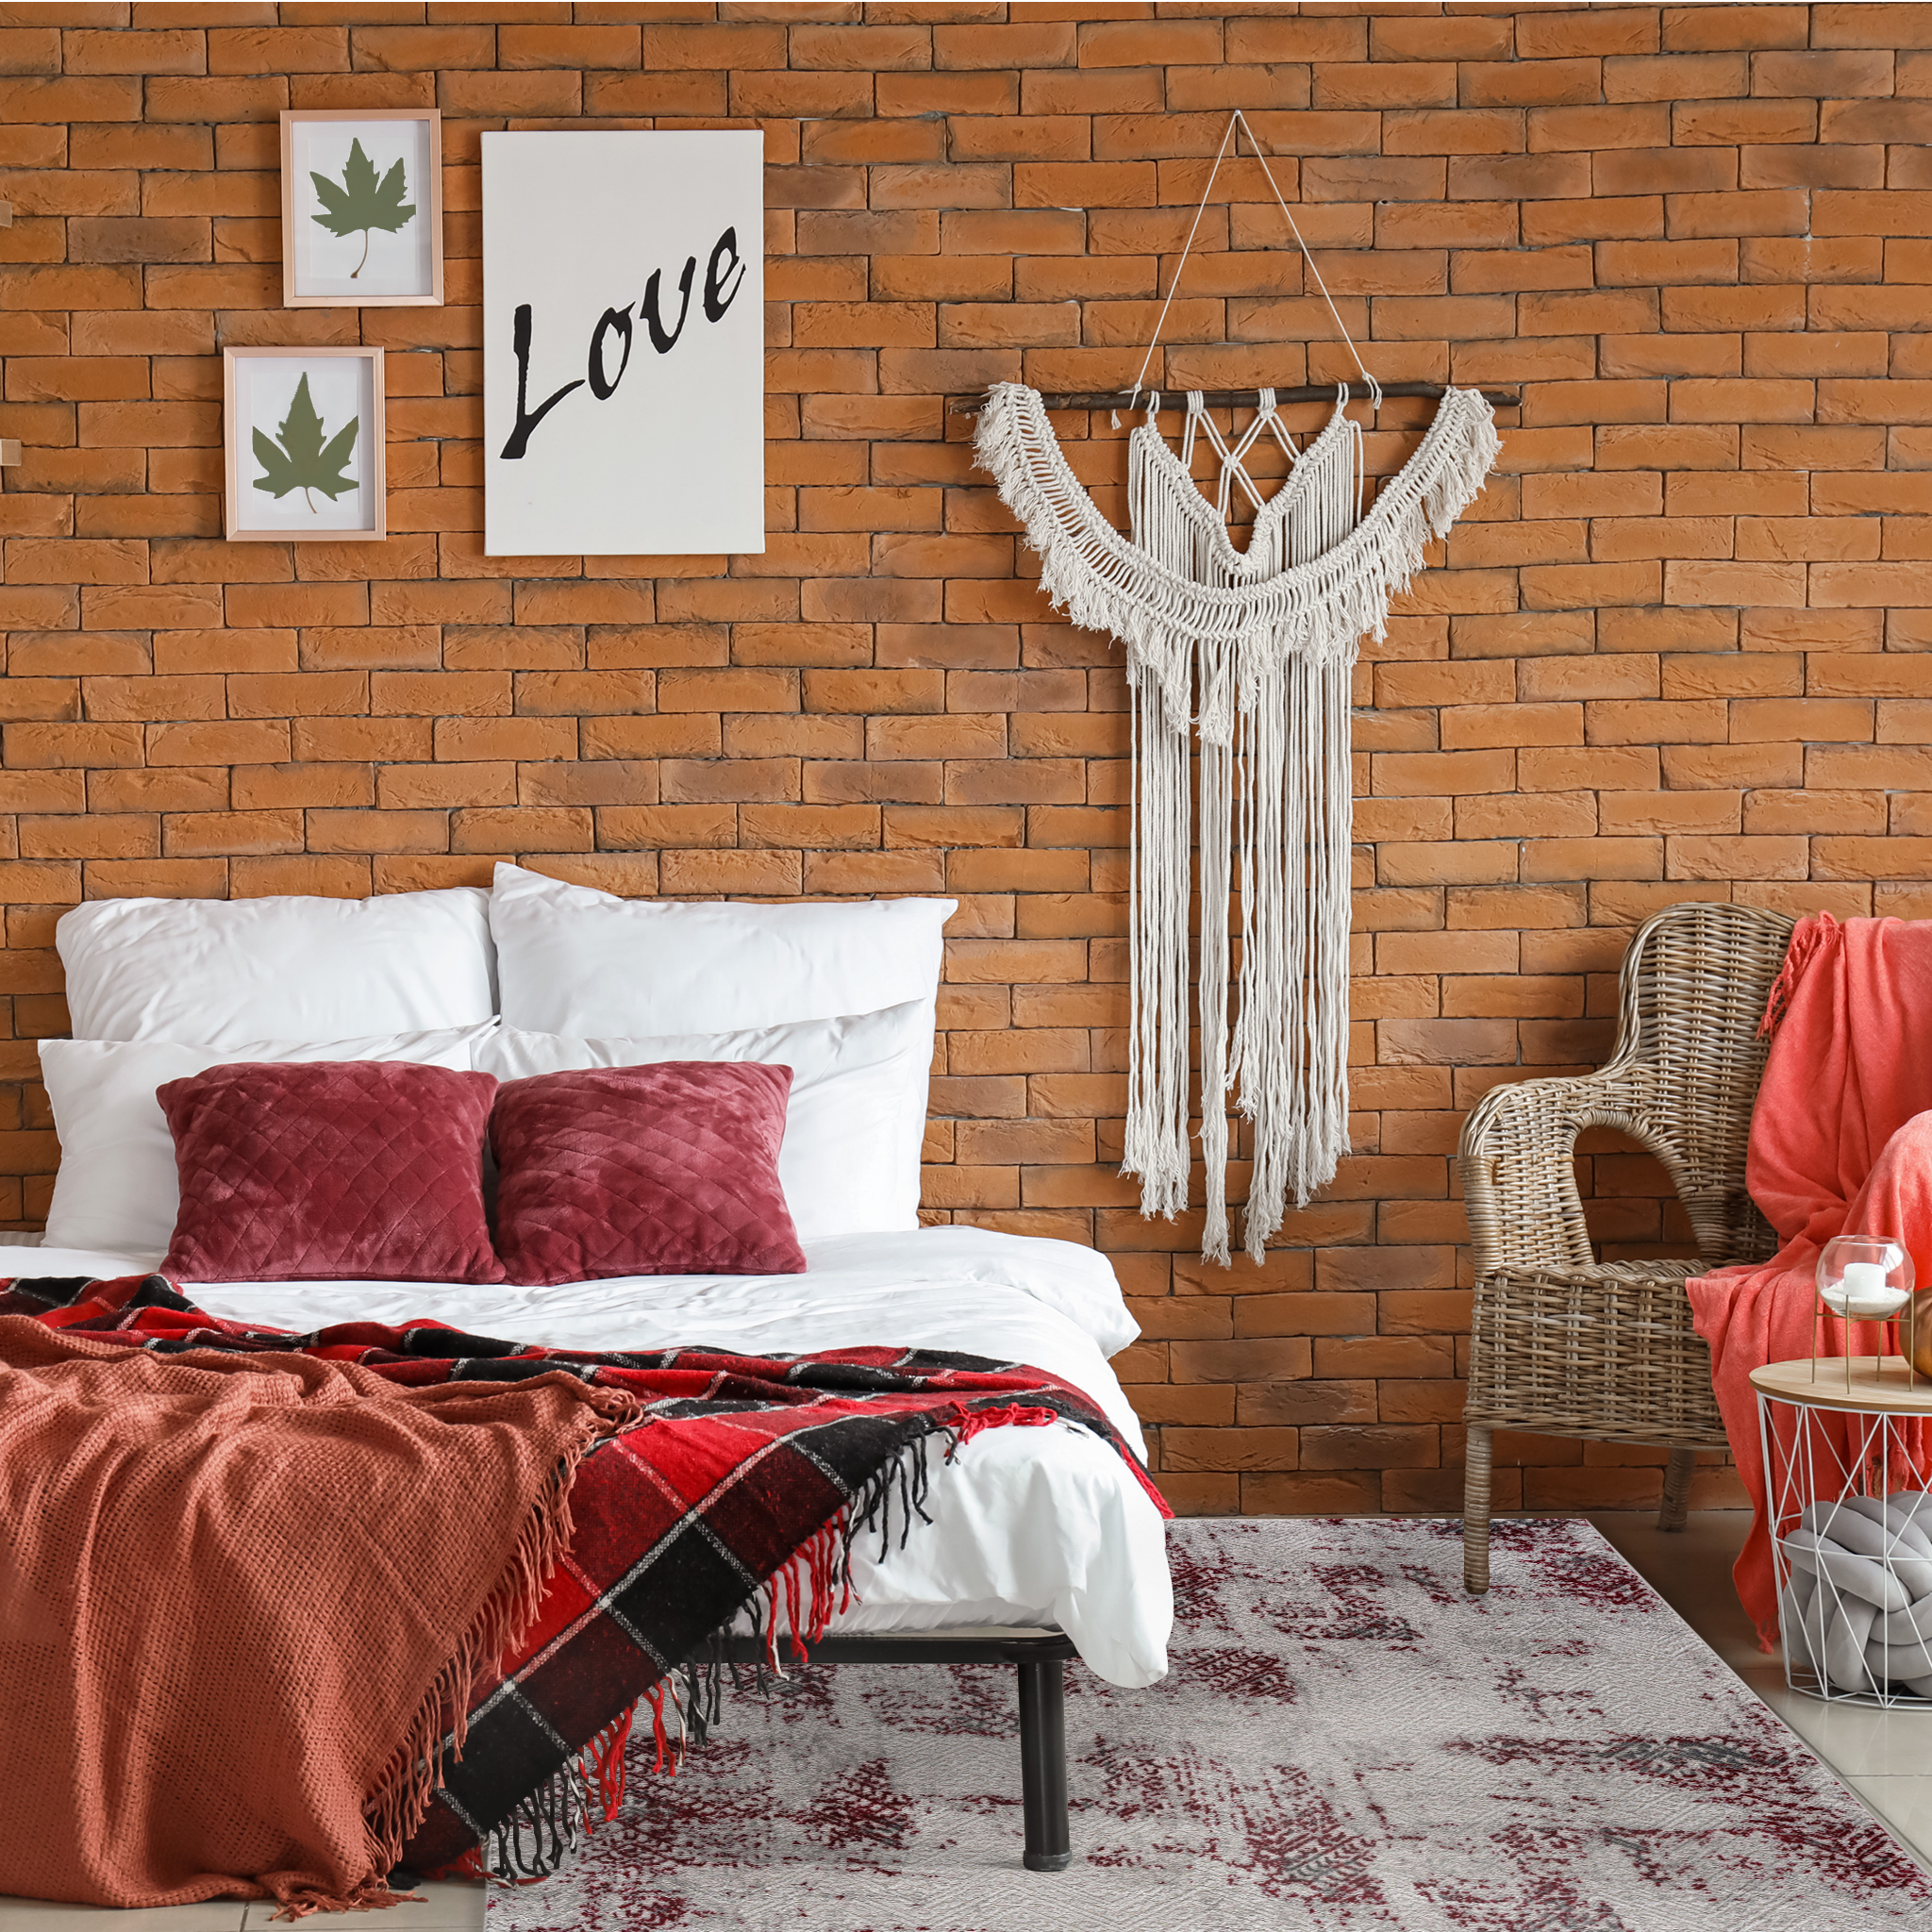 Bohemian bedroom with exposed brick, rattan chair, macrame wall hanging, Istanbul Area Rug in Christmas vibes